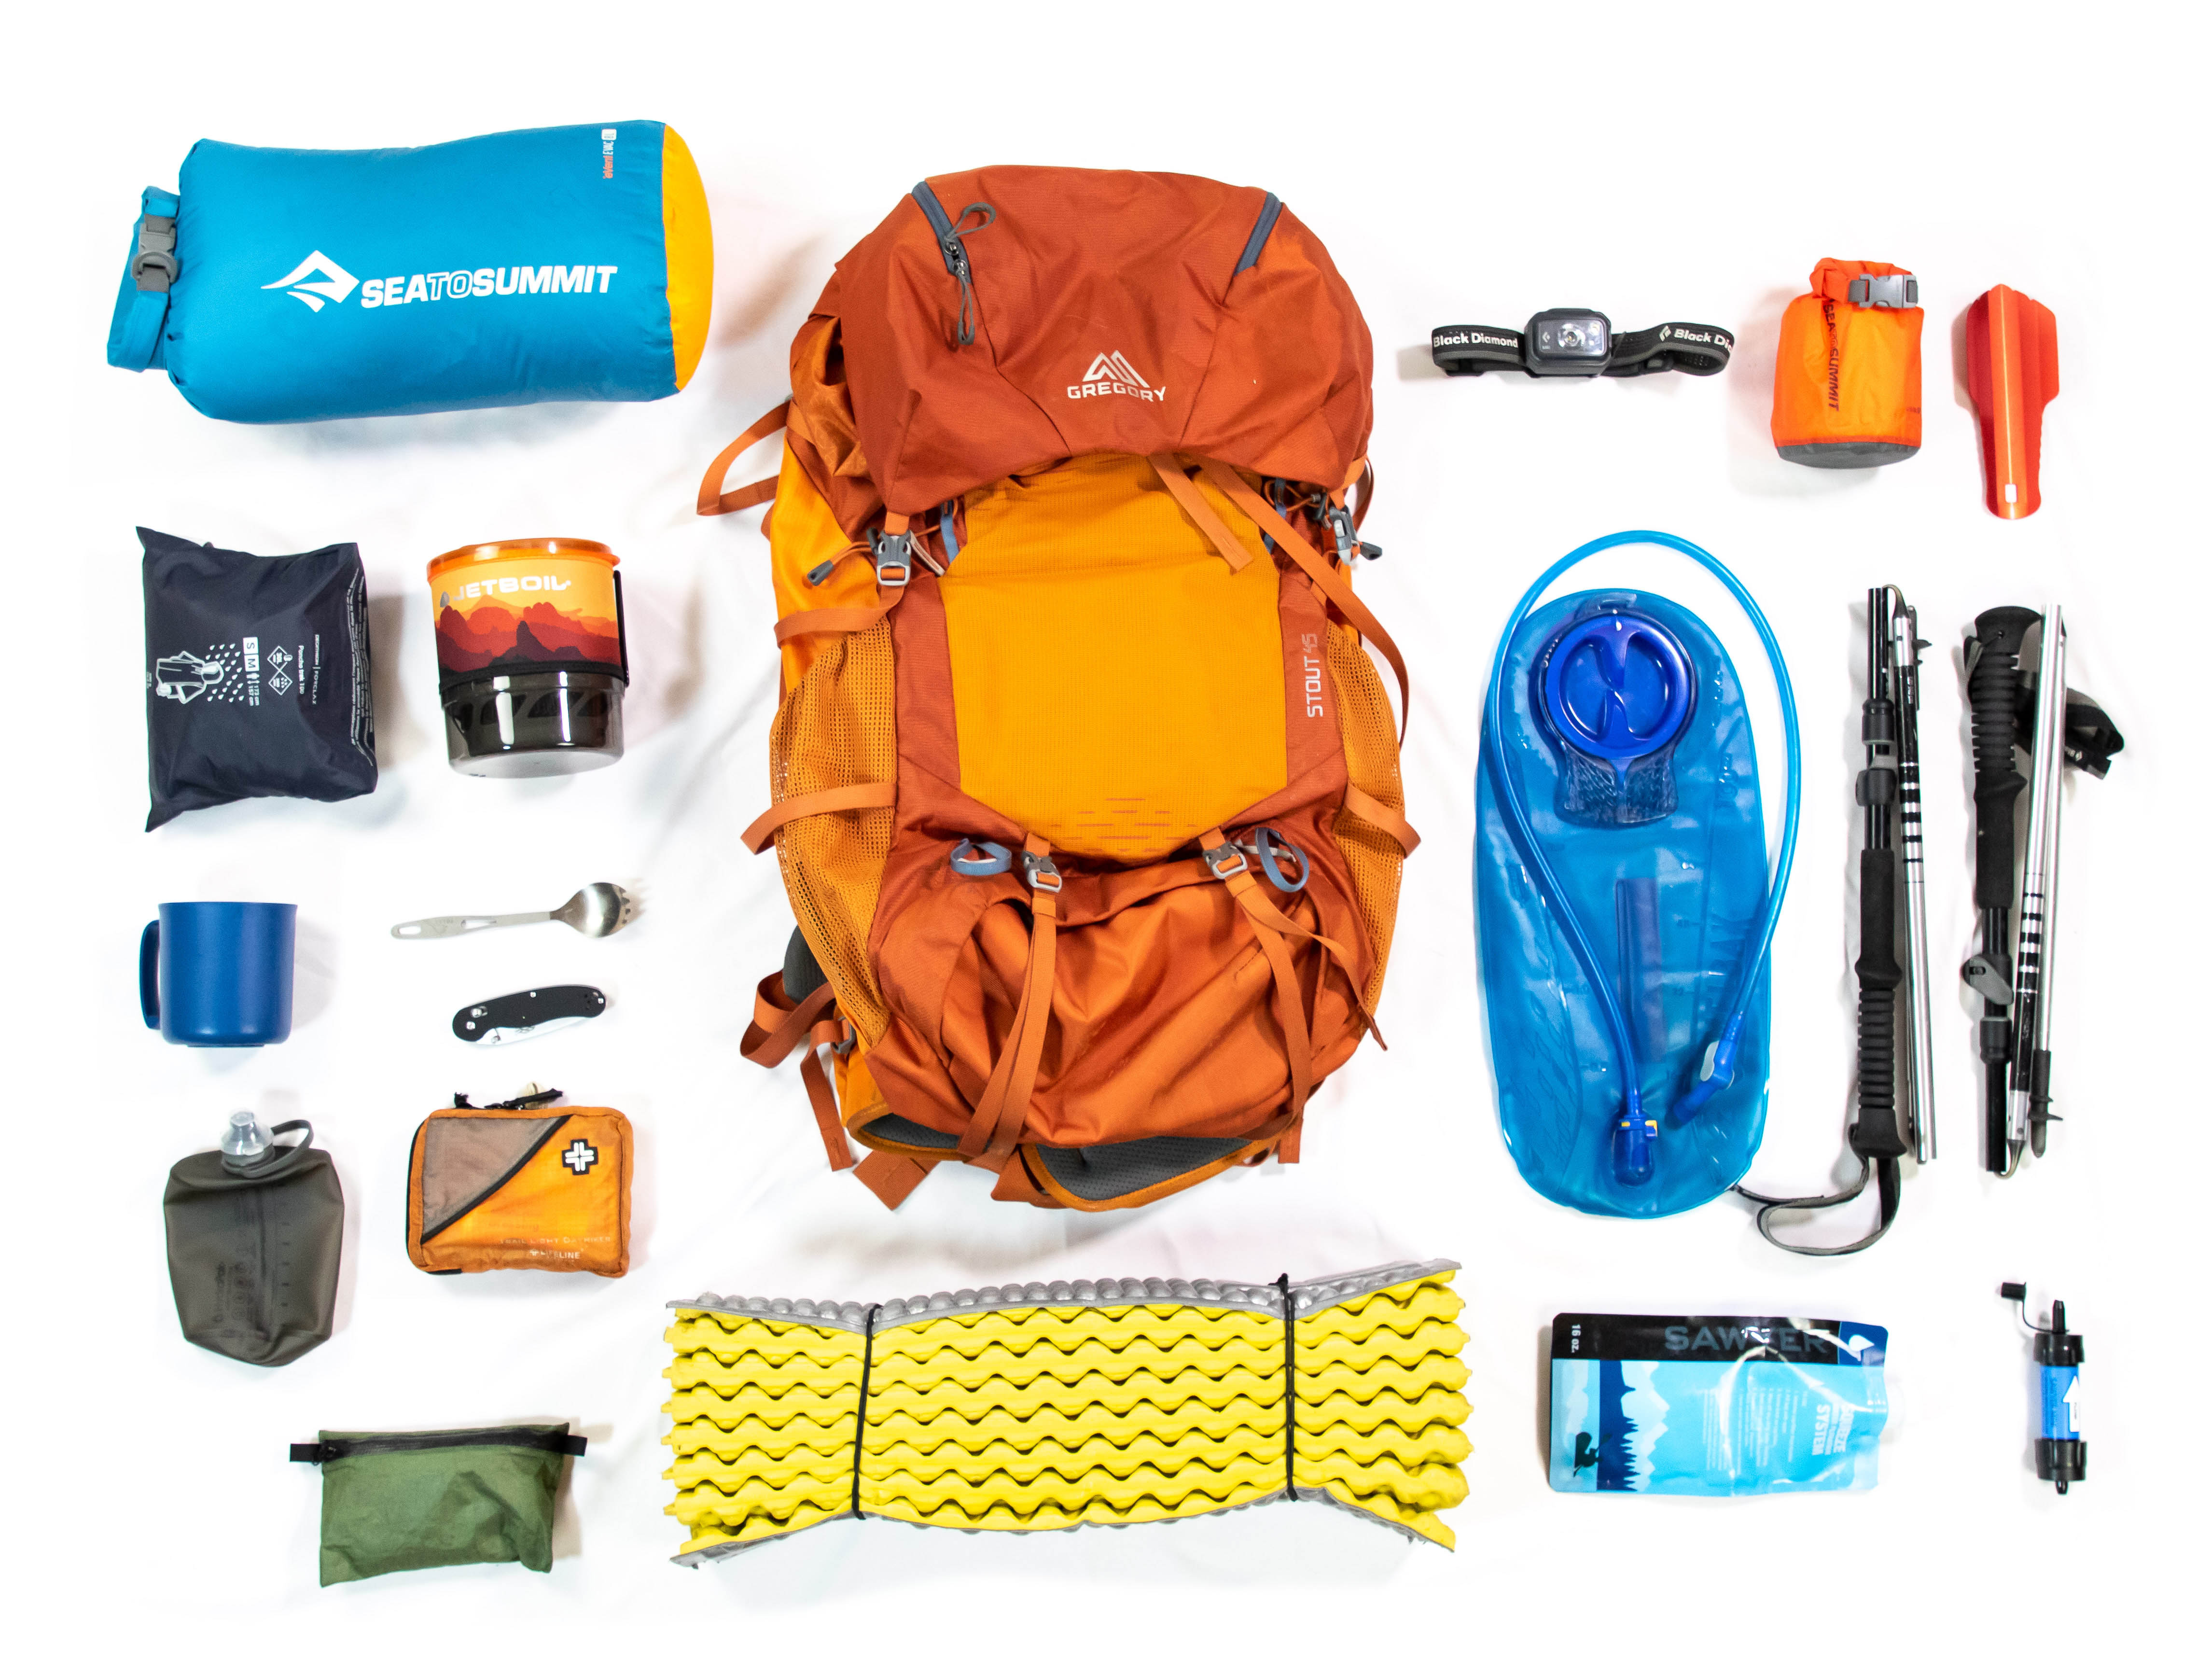 Kit a hiker typically packs for a backpacking trip